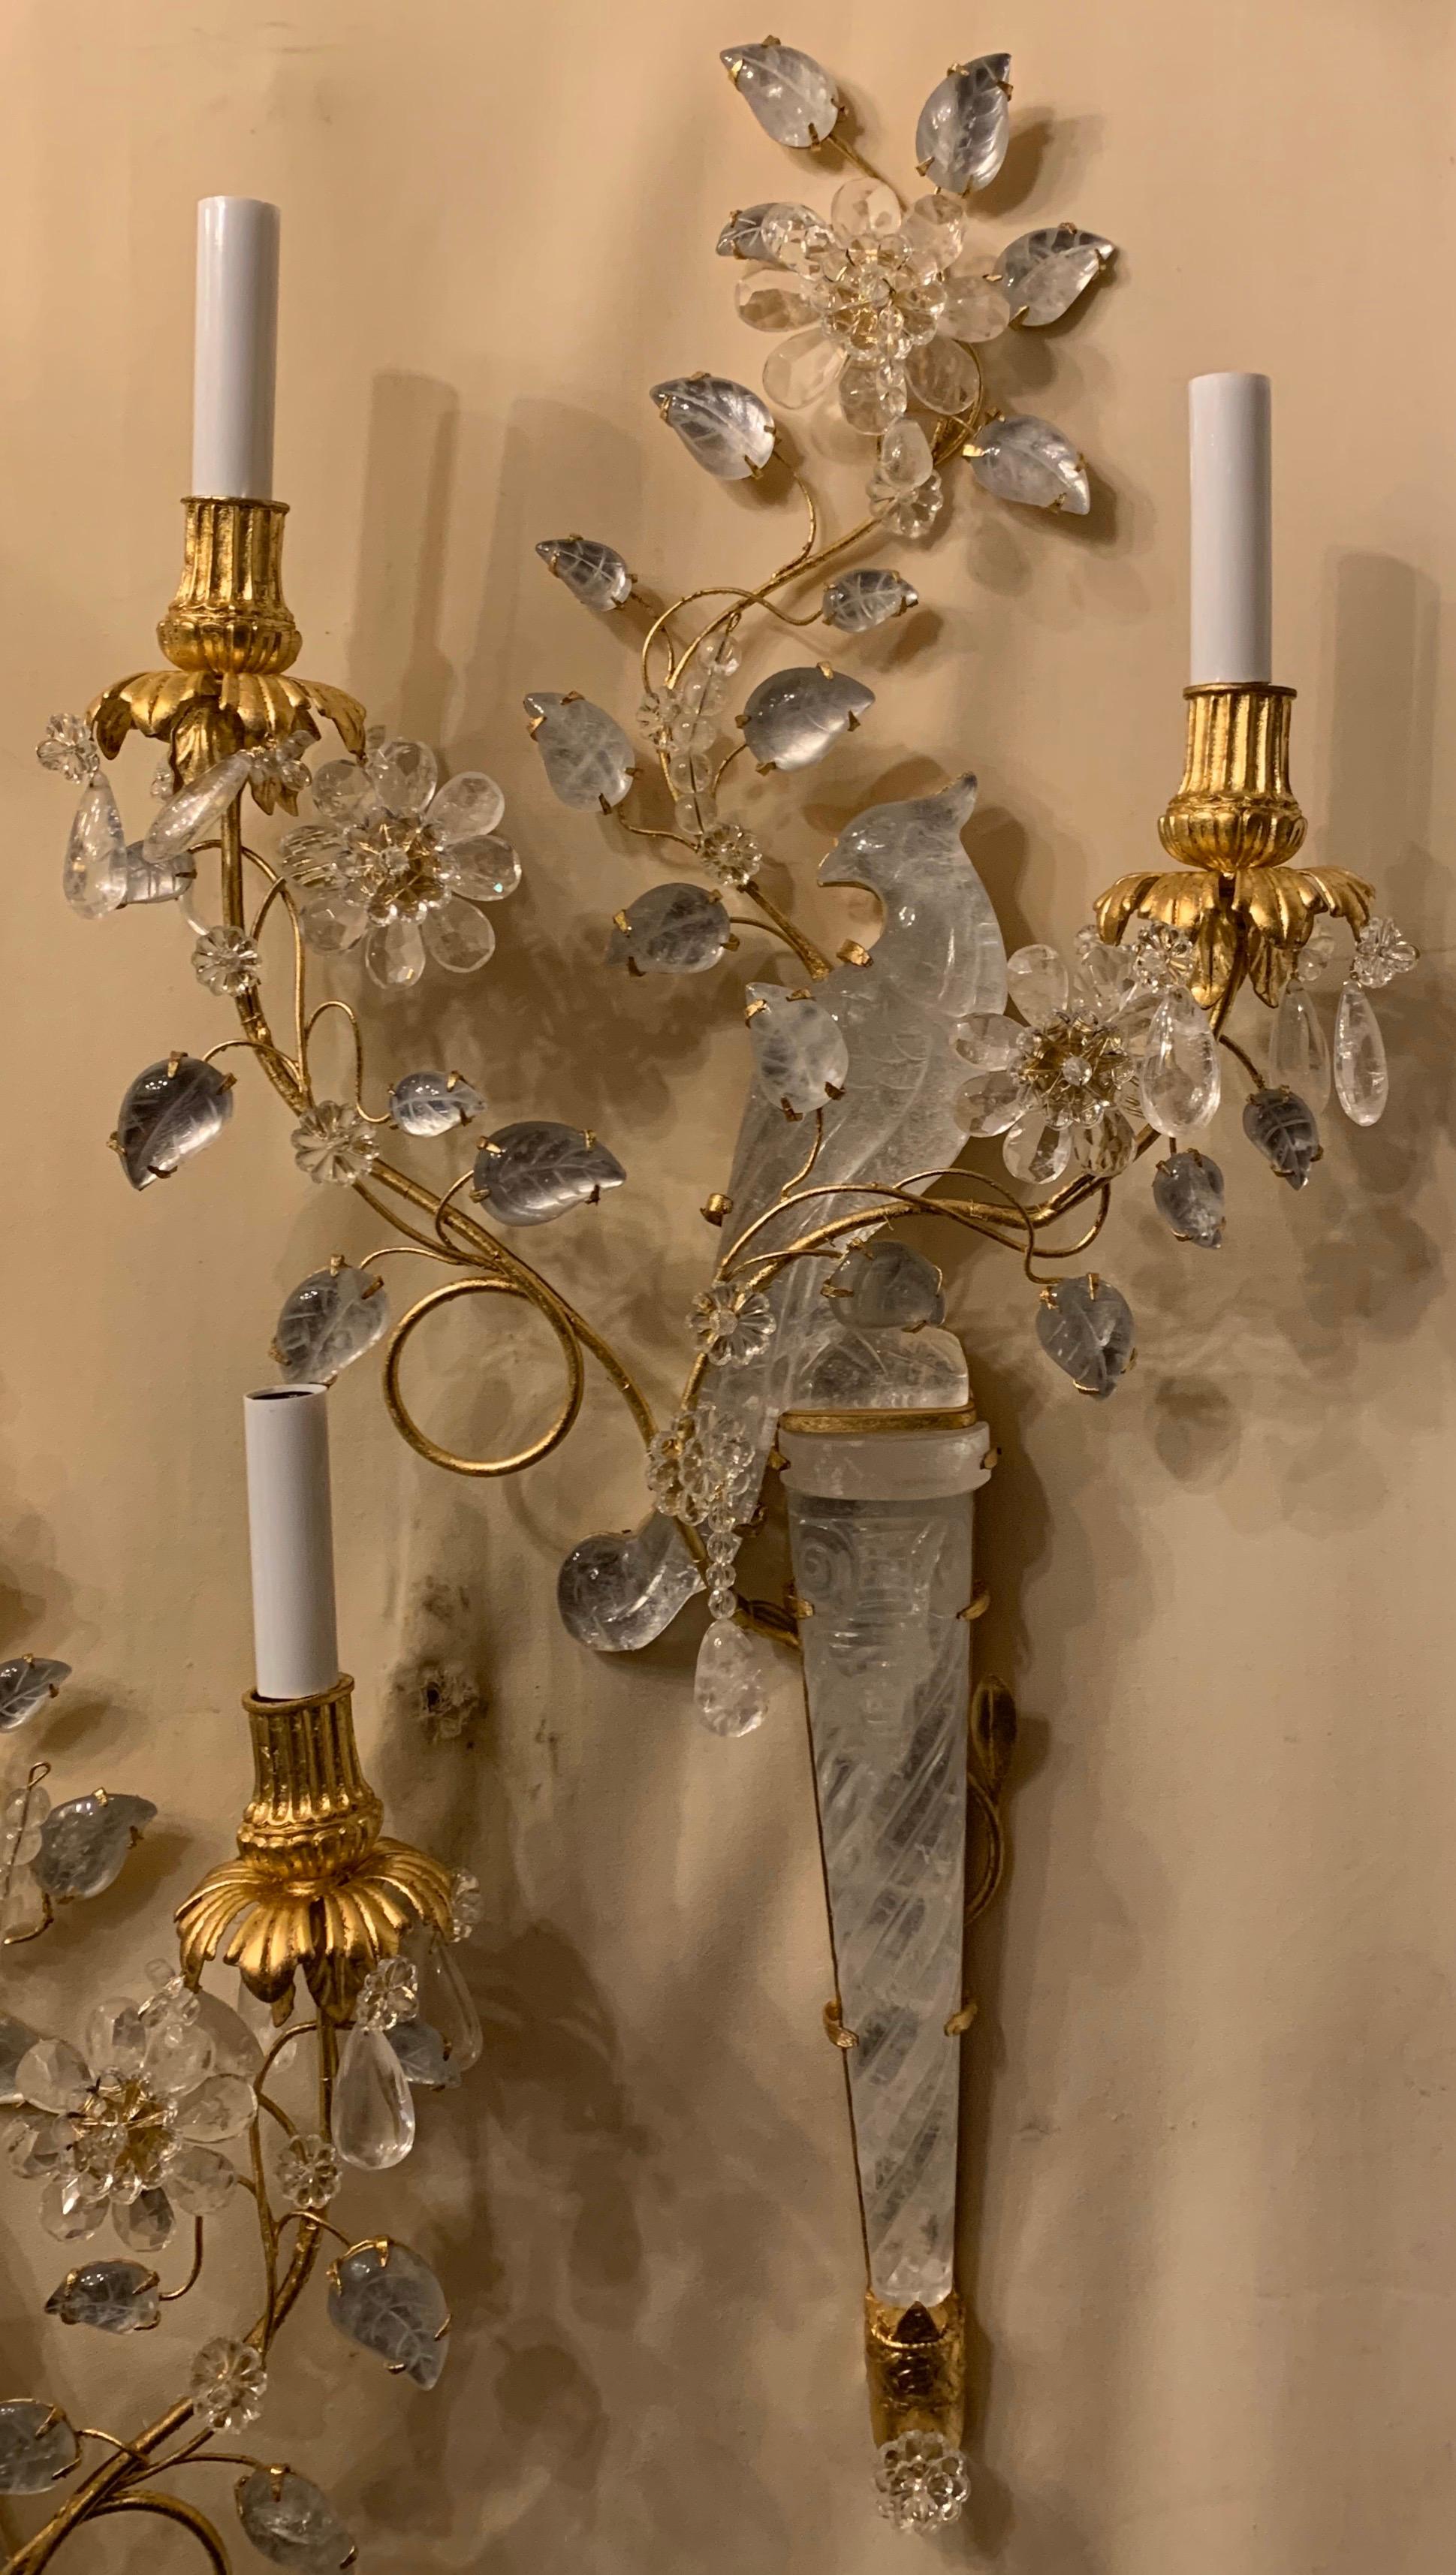 A wonderful pair of chinoiserie motif rock crystal two-arm with new candelabra sockets and wiring gilt bird form parrot sconces with flowers.

3 pairs available
Each pair sold separately.